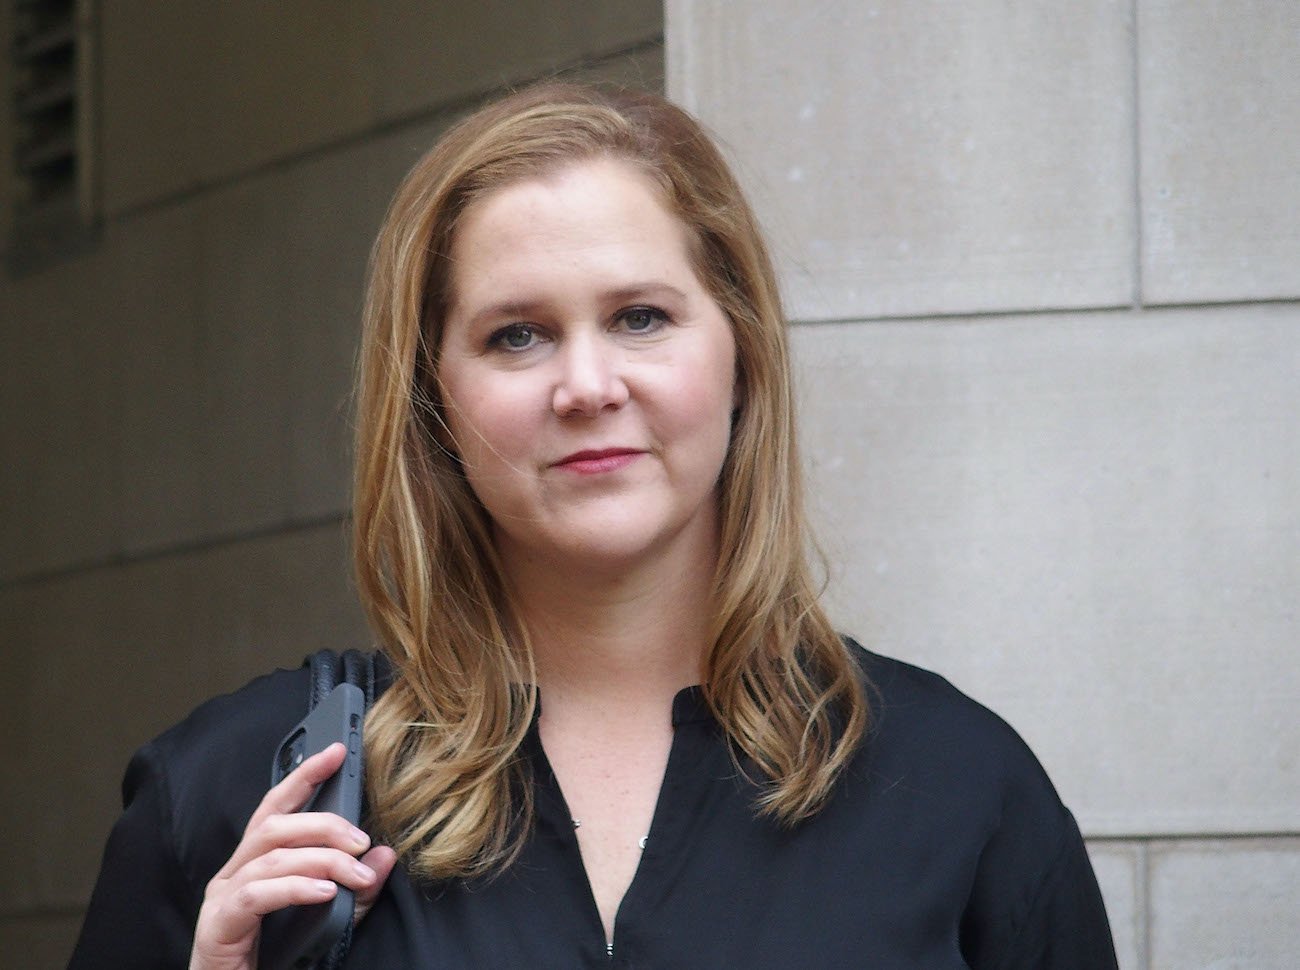 Amy Schumer on set for Life & Beth the Hulu comedy series